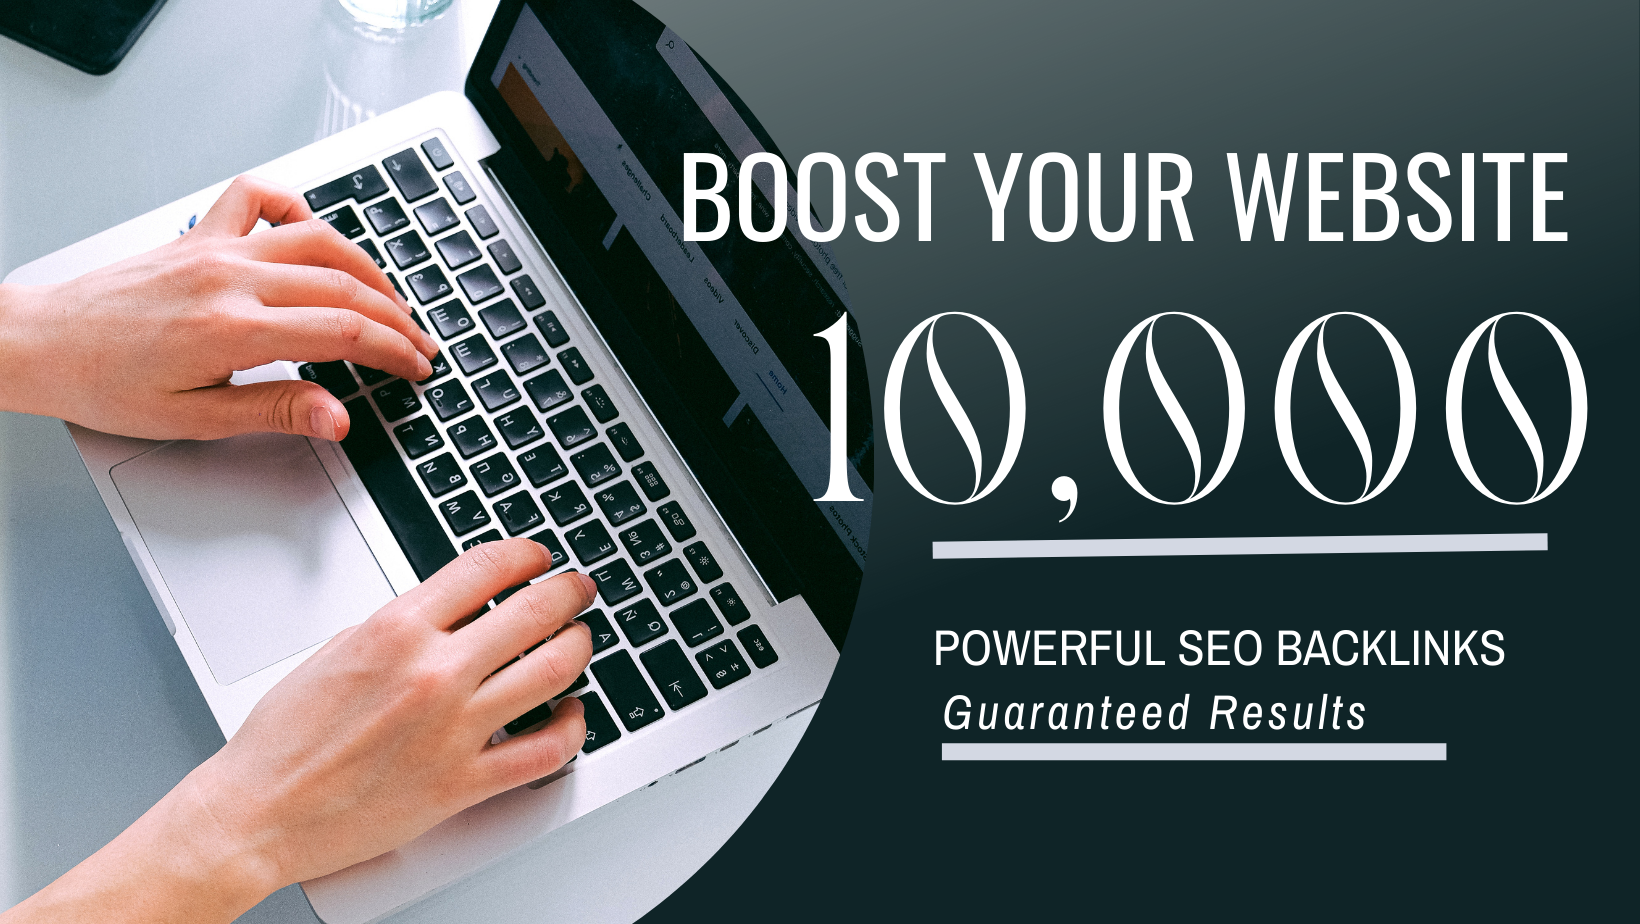 Boost Your Website Ranking with 10,000 Powerful SEO Backlinks - Guaranteed Results!